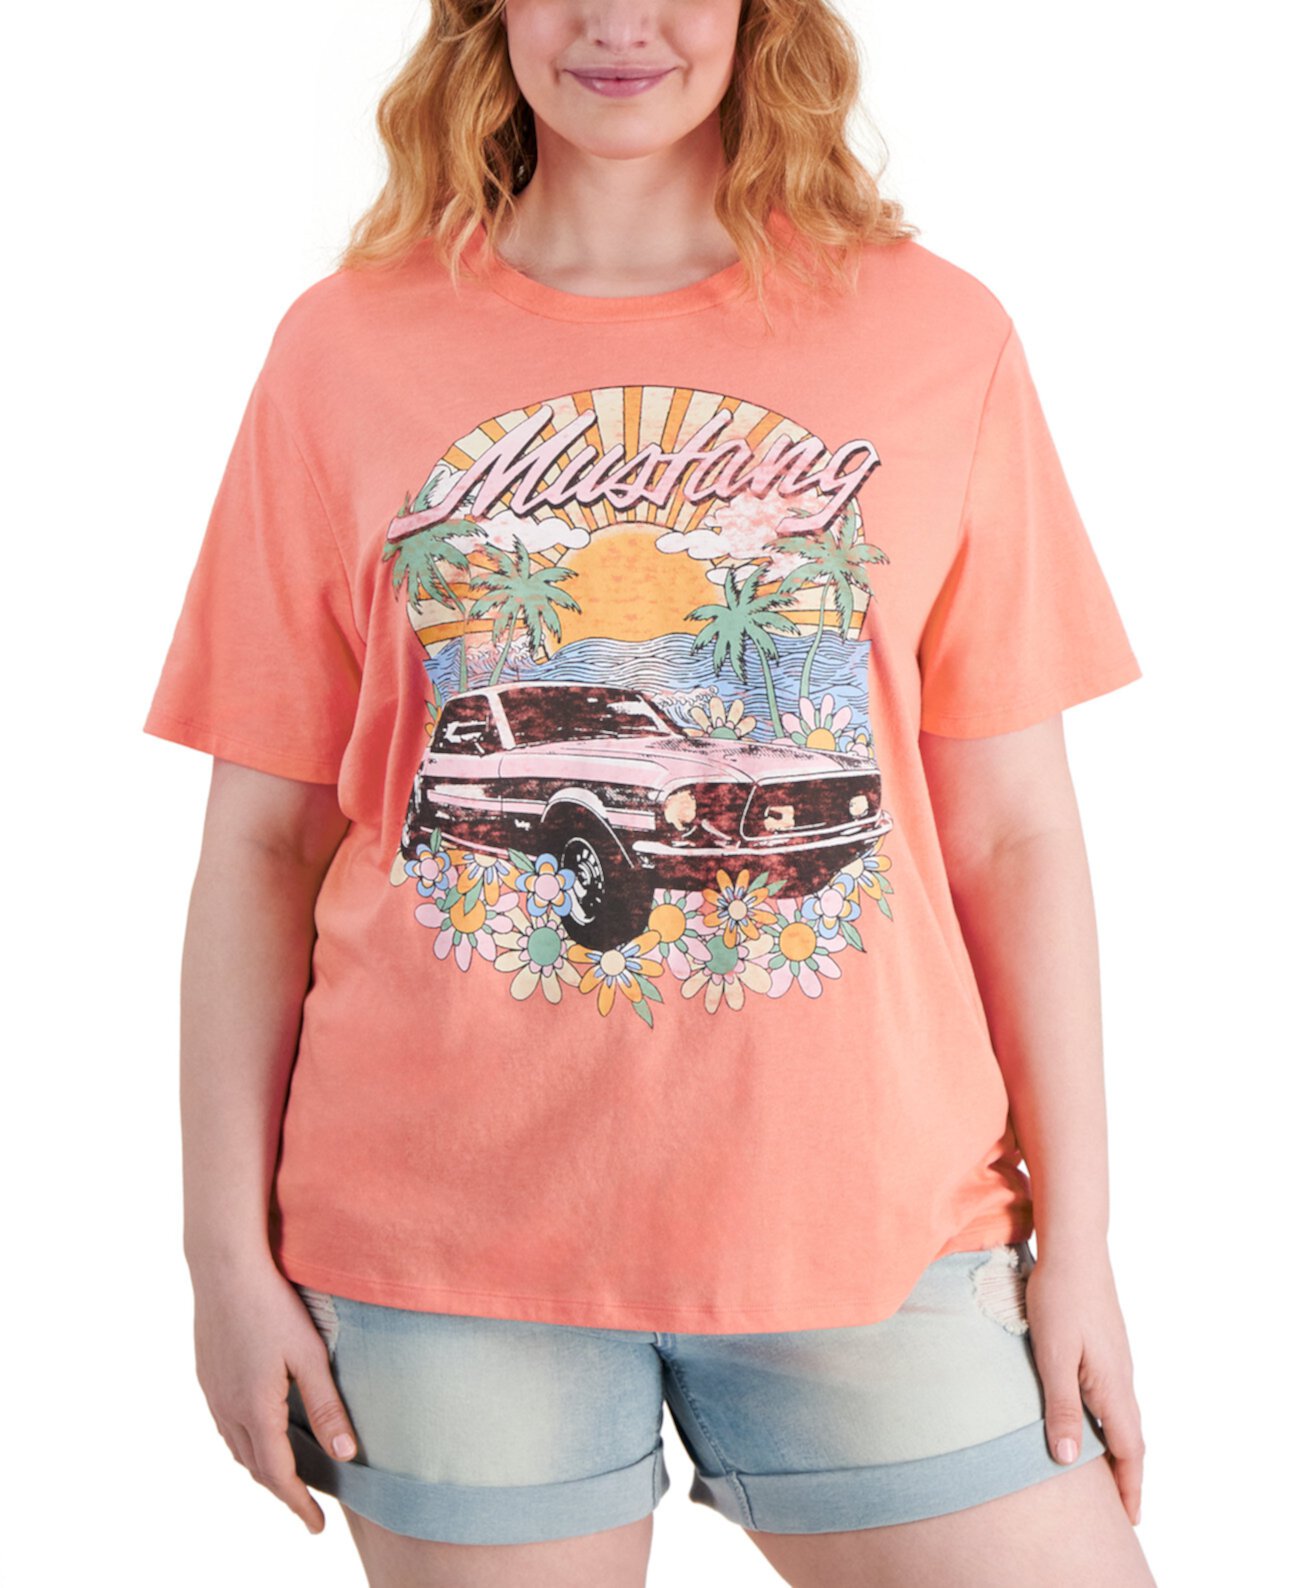 Plus Size Short-Sleeve Mustang Graphic T-Shirt Love Tribe